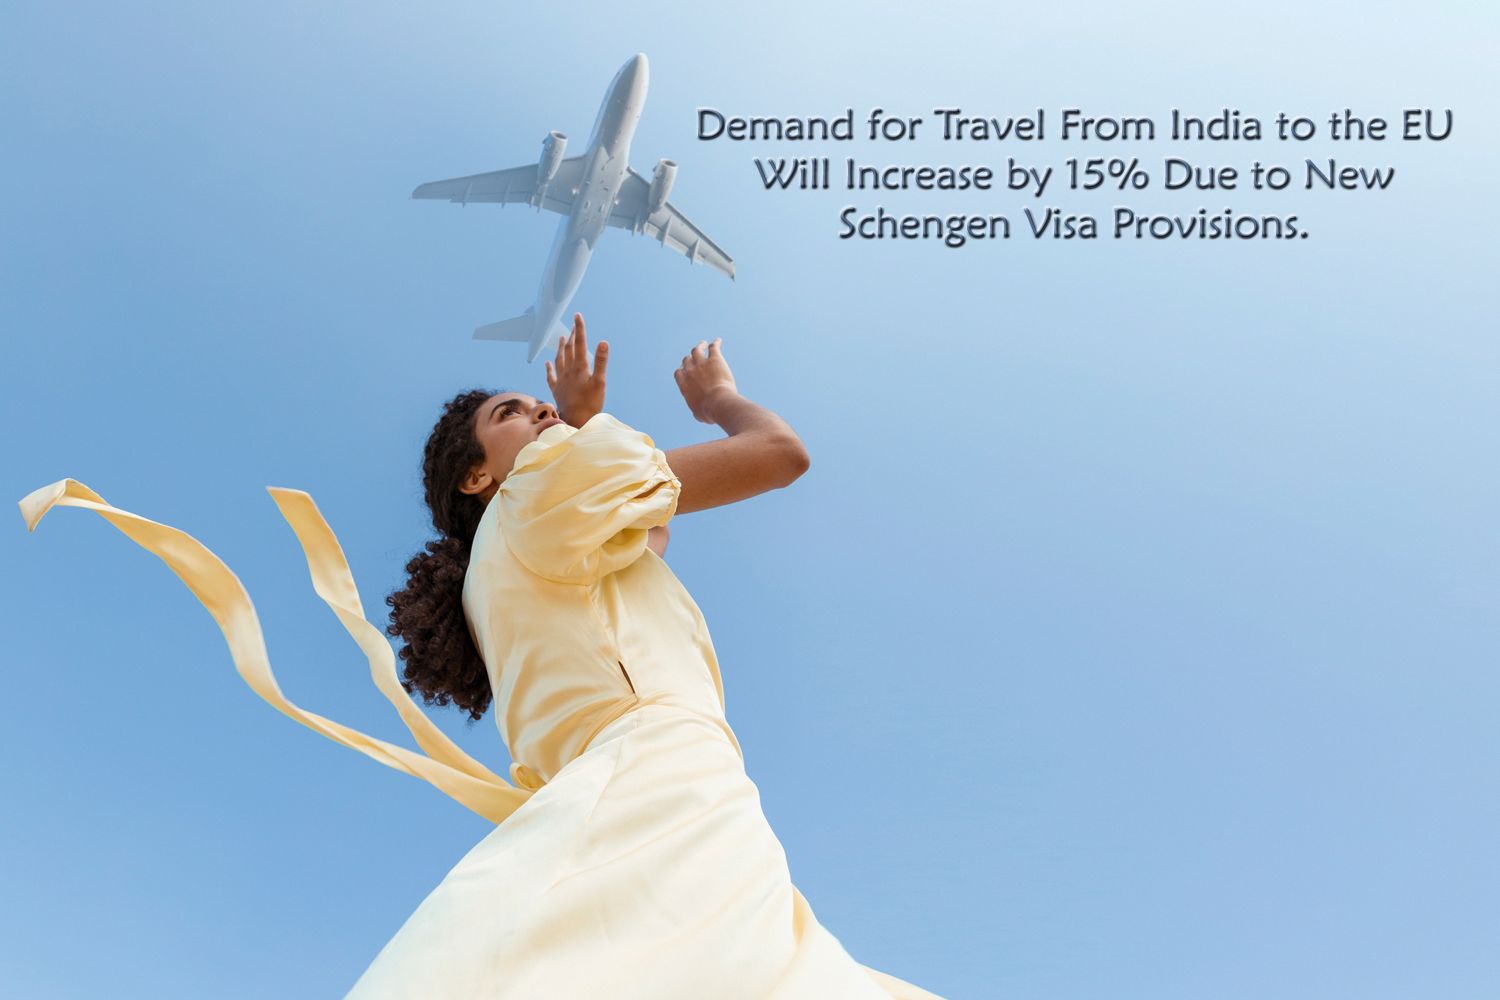 Demand for Travel From India to the EU Will Increase by 15% Due to New Schengen Visa Provisions.